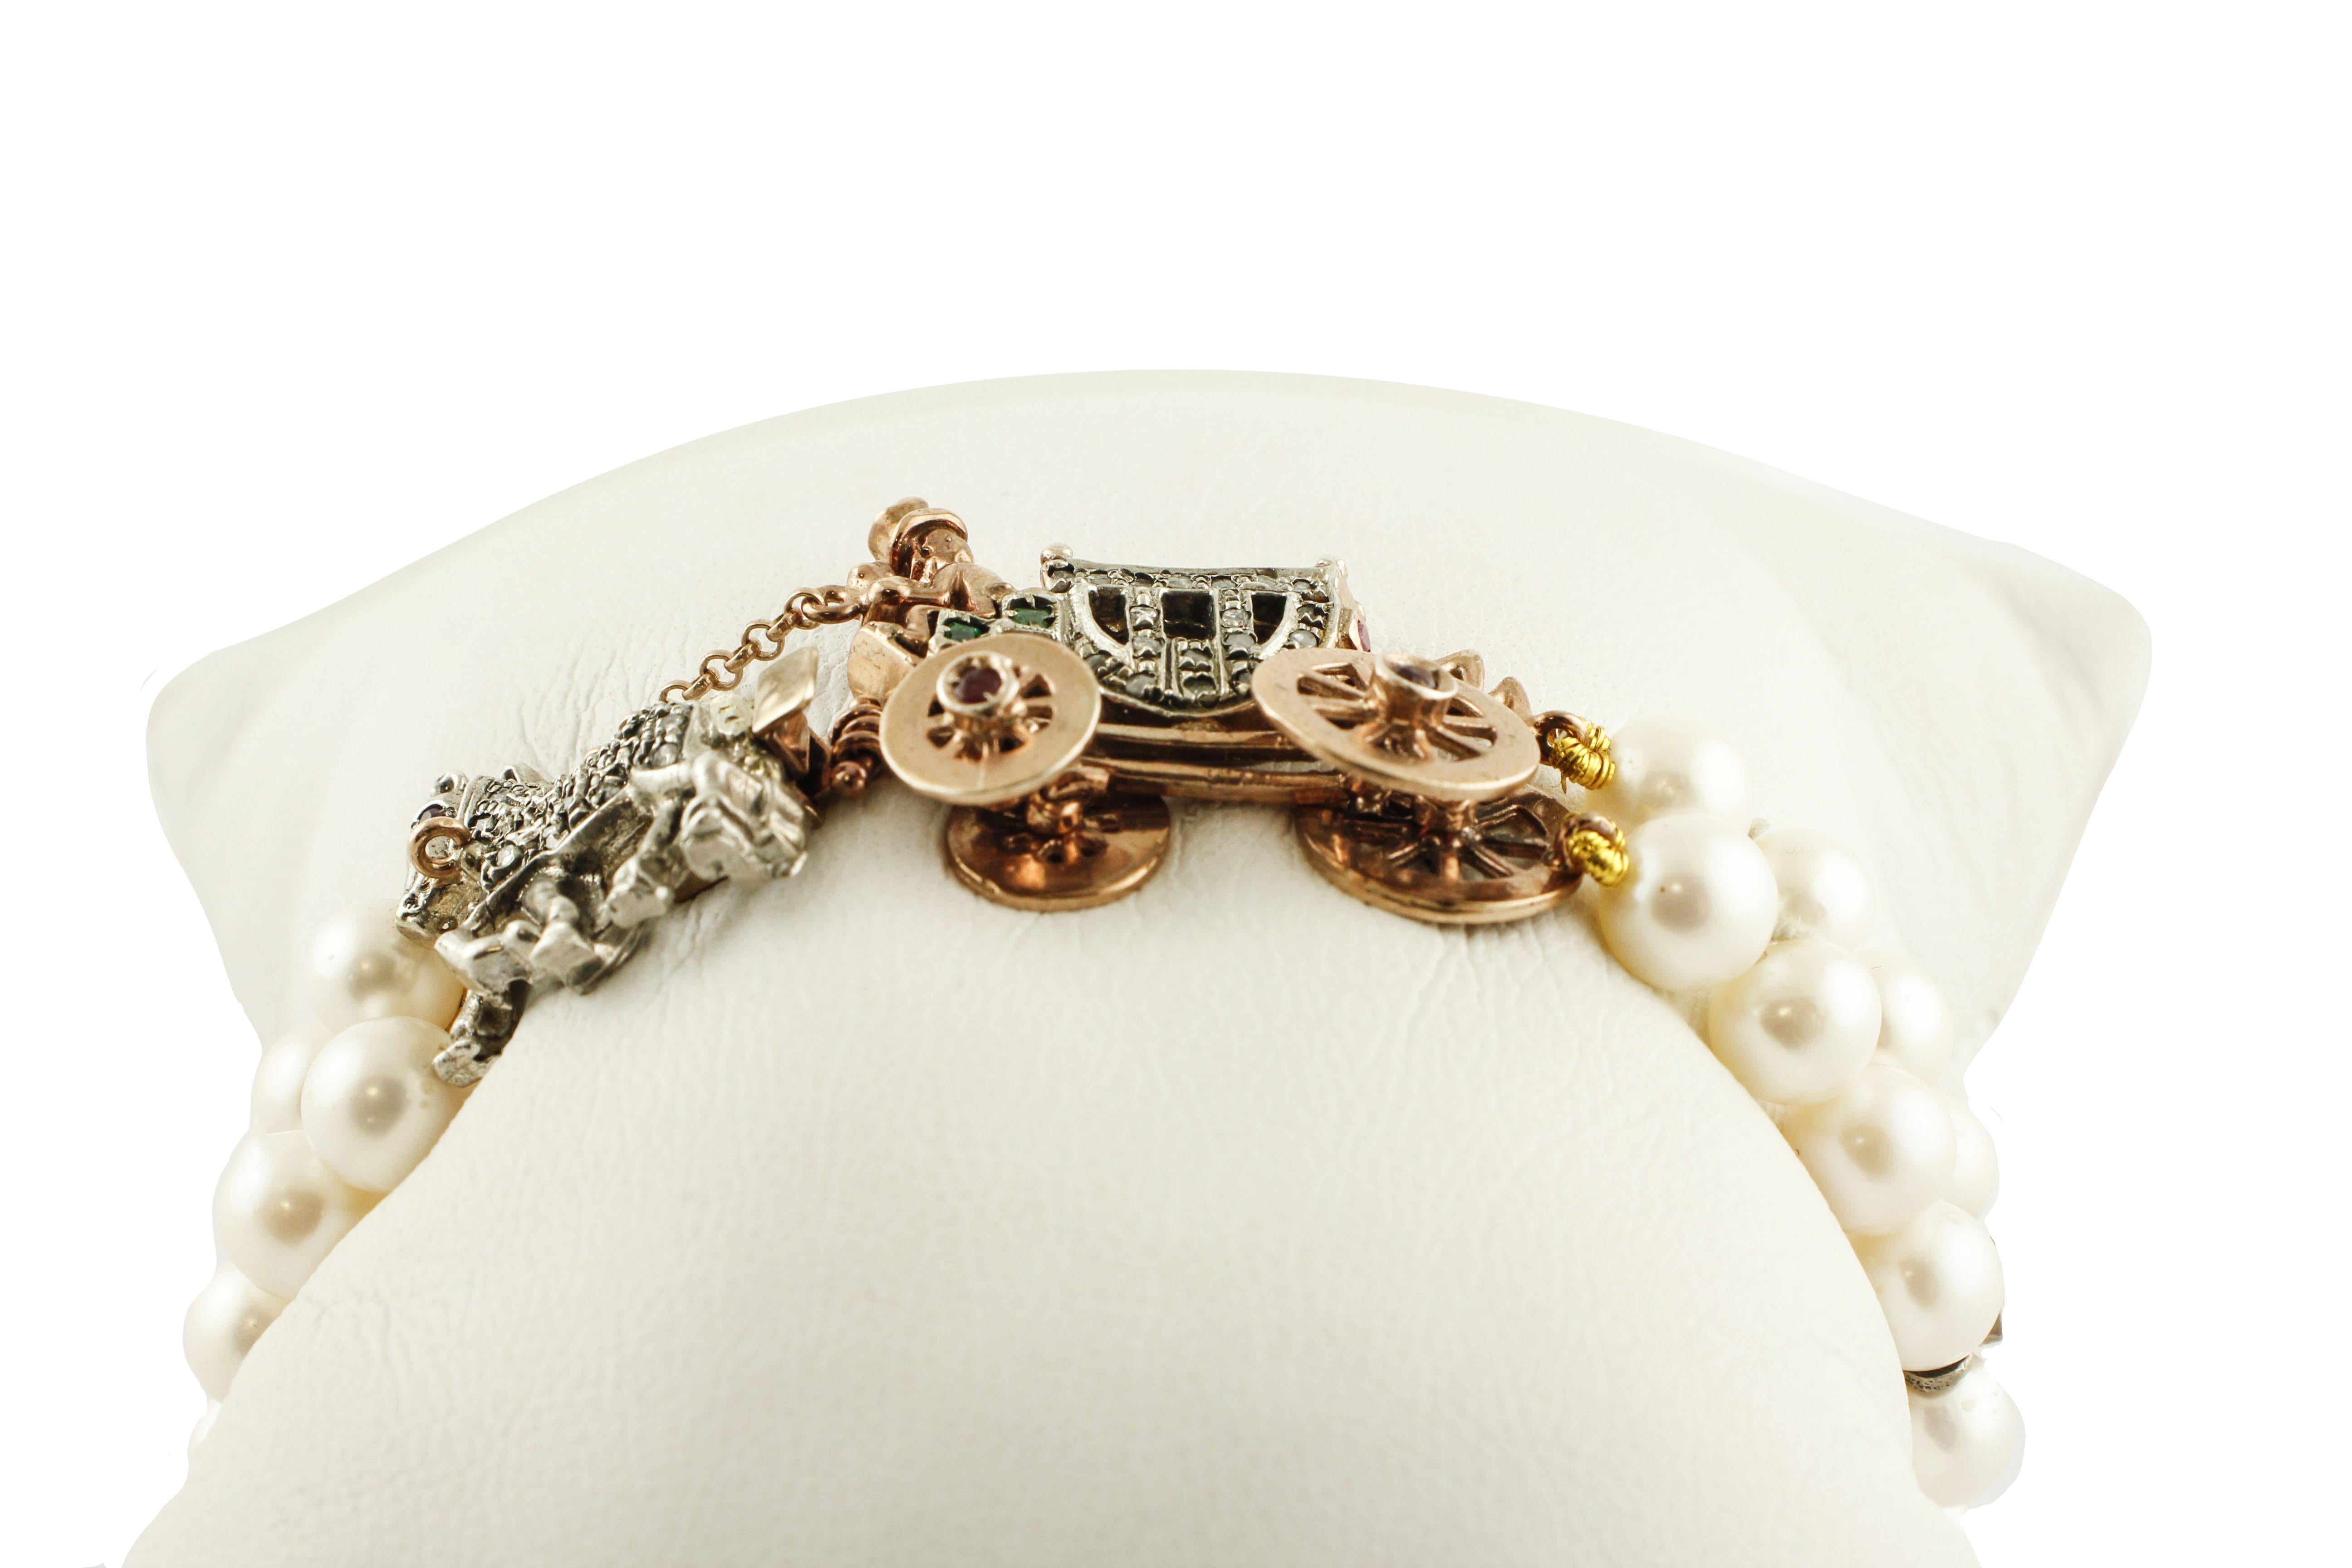 Unique beaded bracelet composed of two white pearls rows (17.30 g) connected with 4 9K rose gold and silver structure studded by rubies. It has a very special closure in 9K rose gold and silver, that representing a carriage with movable wheels and